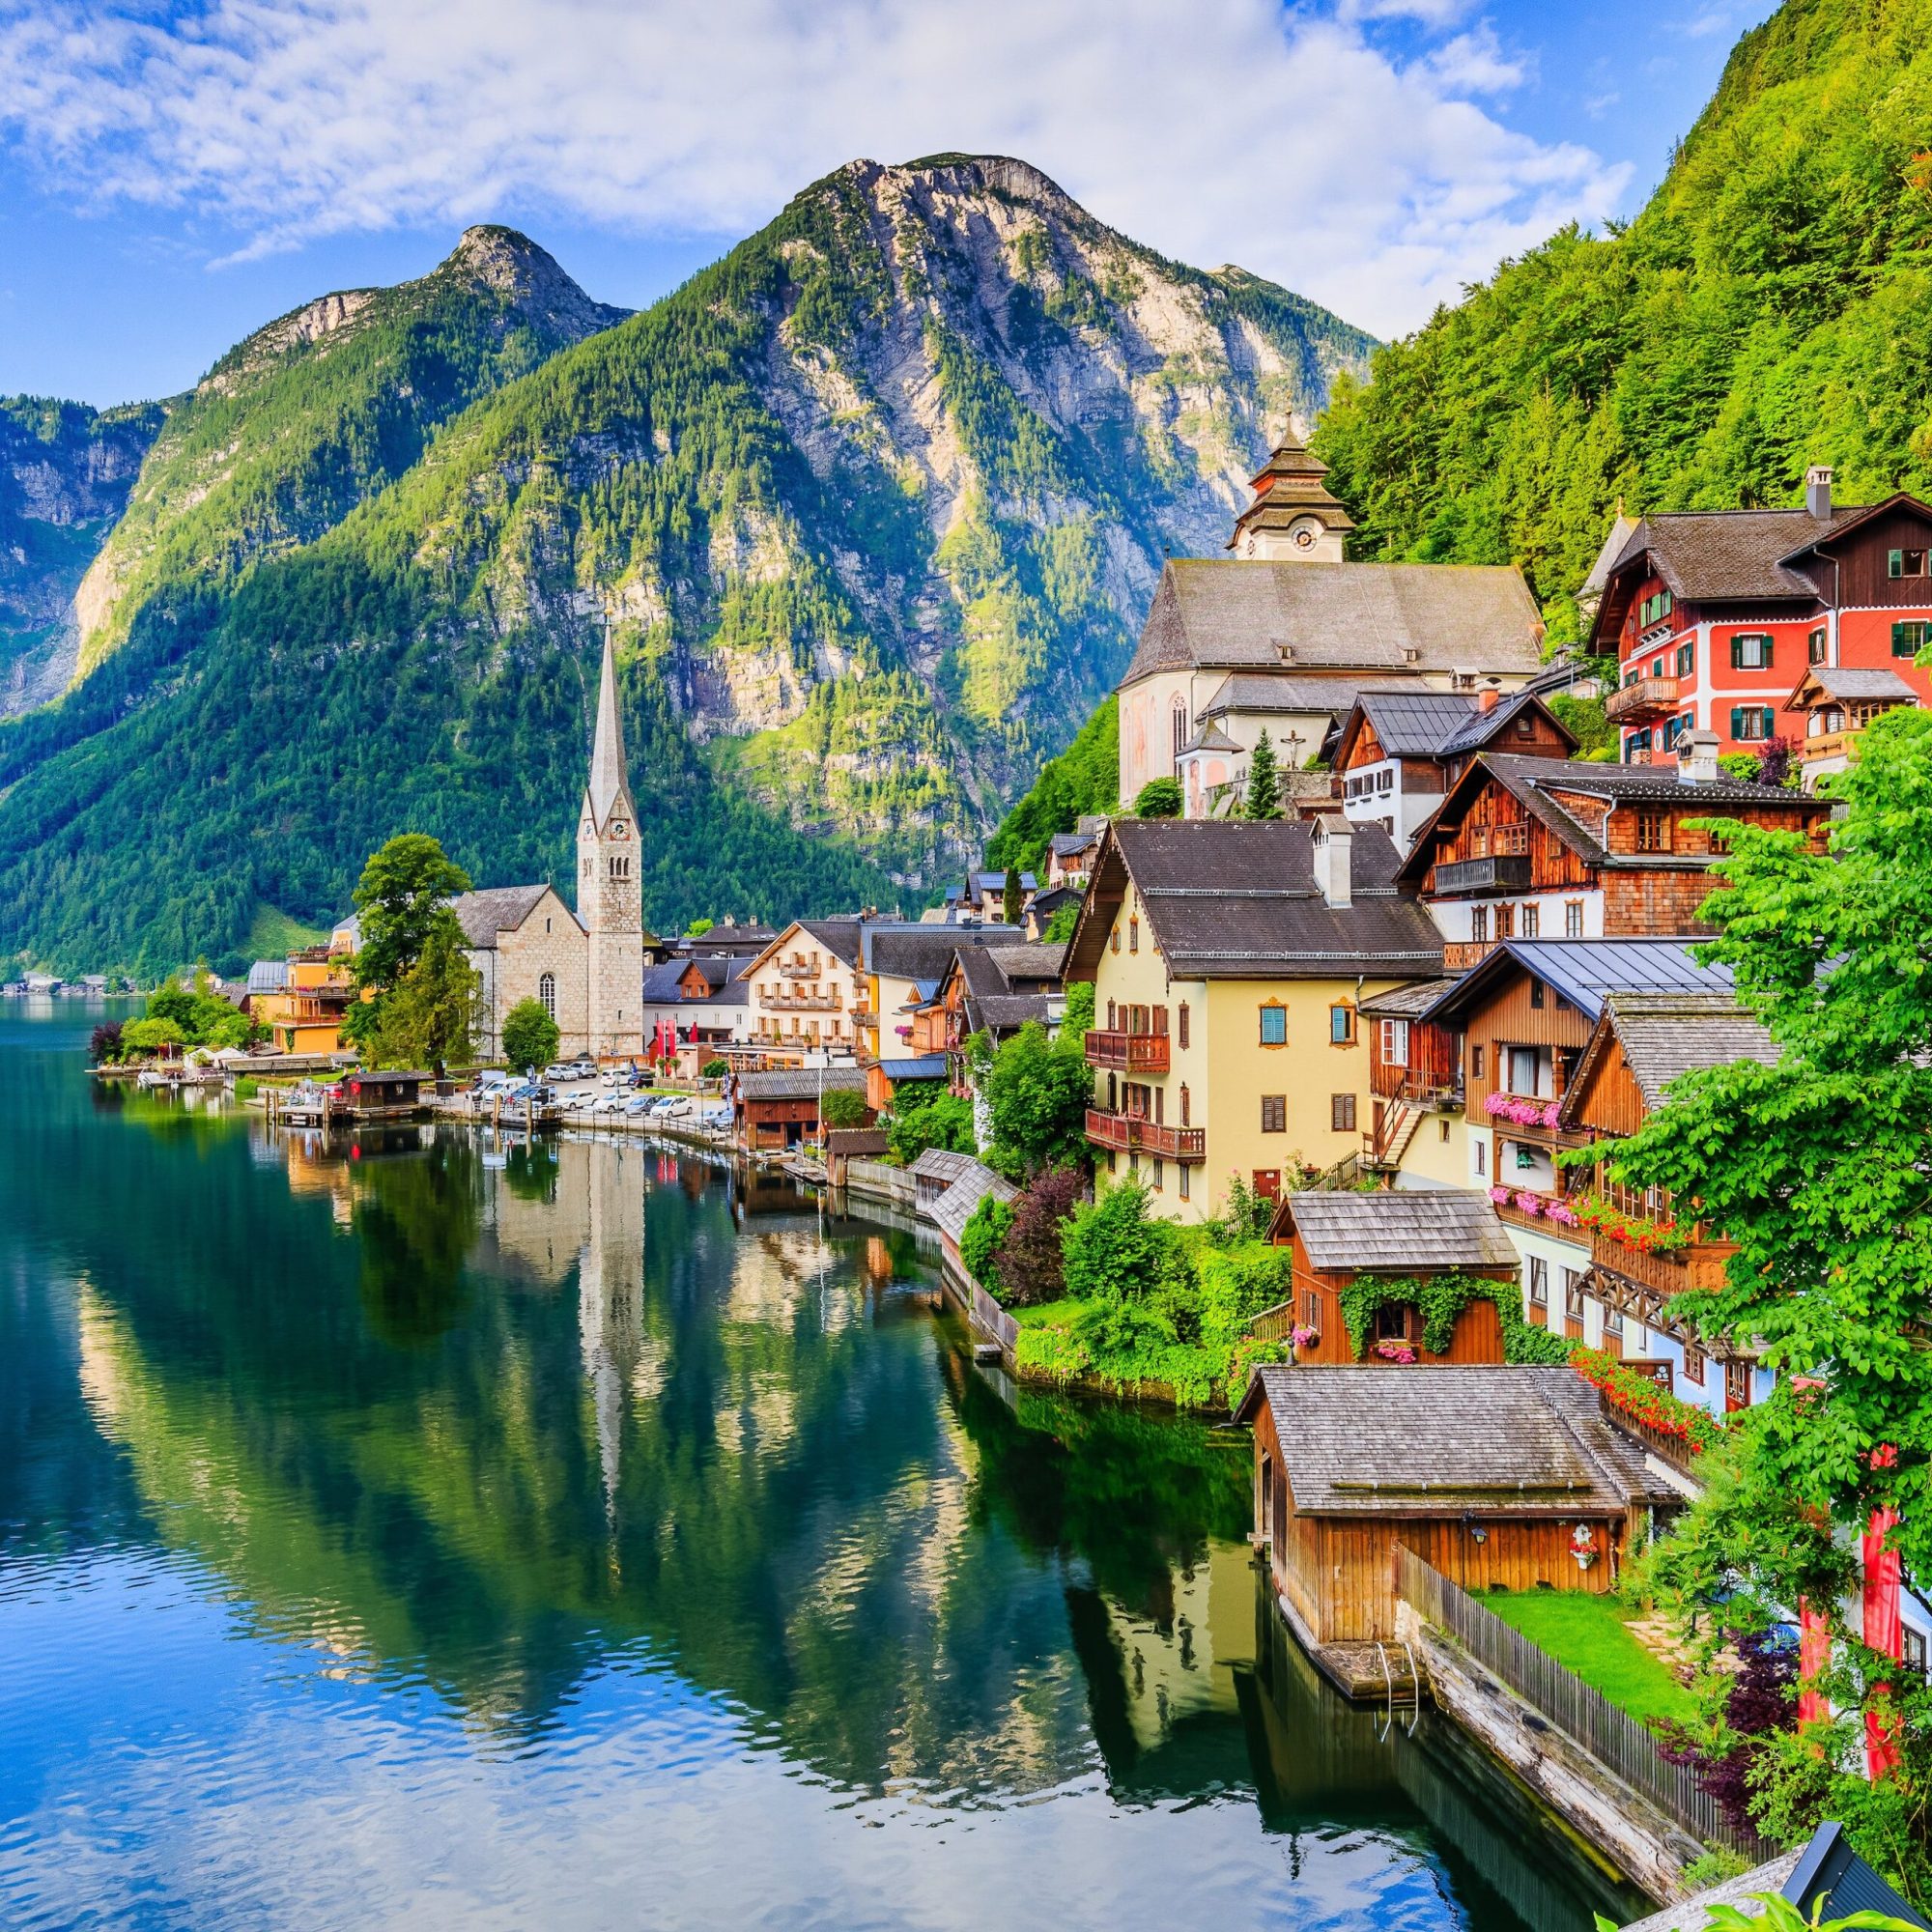 gorgeous alpine scenery: colorful houses on a lake with mountains in background